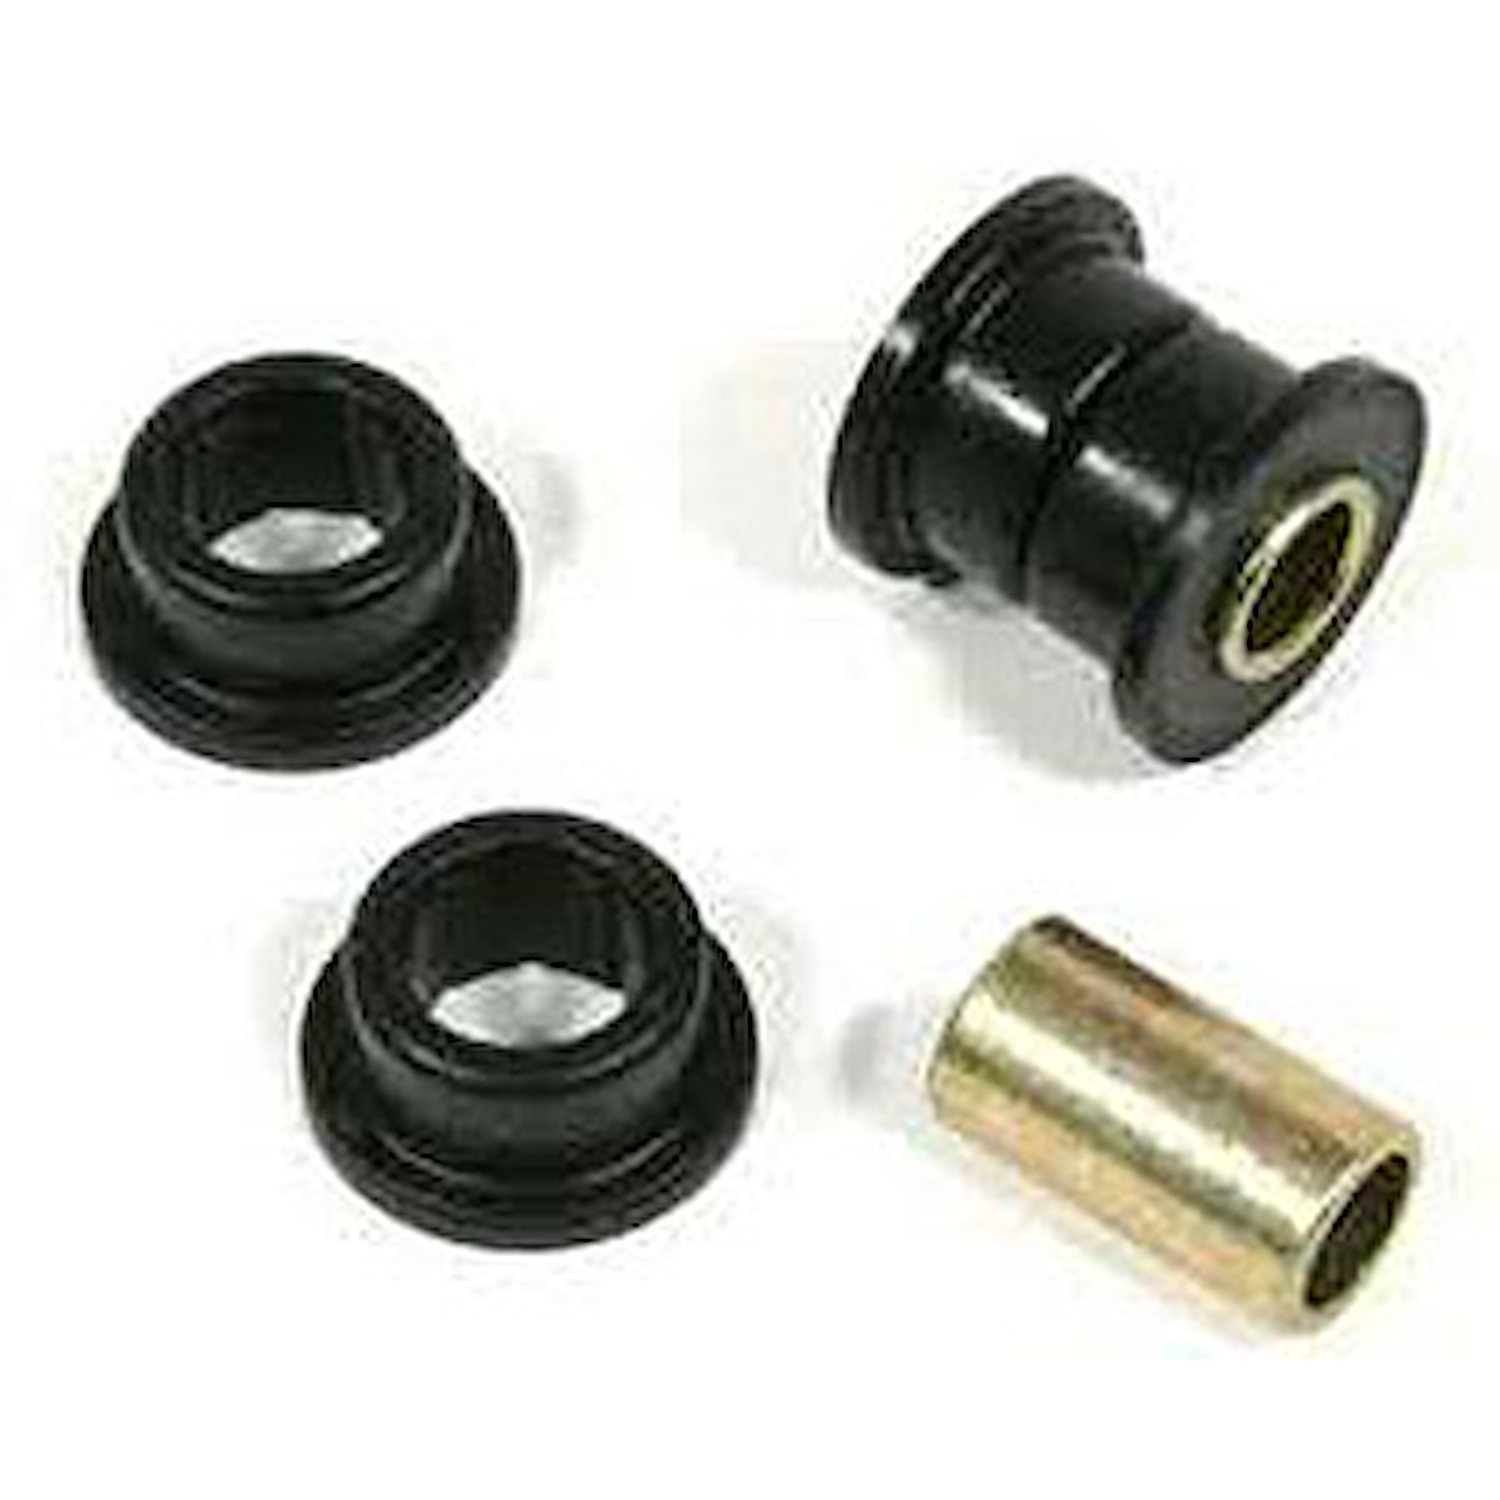 Replacement Bushing Kit For #515-1501 and #515-1501R